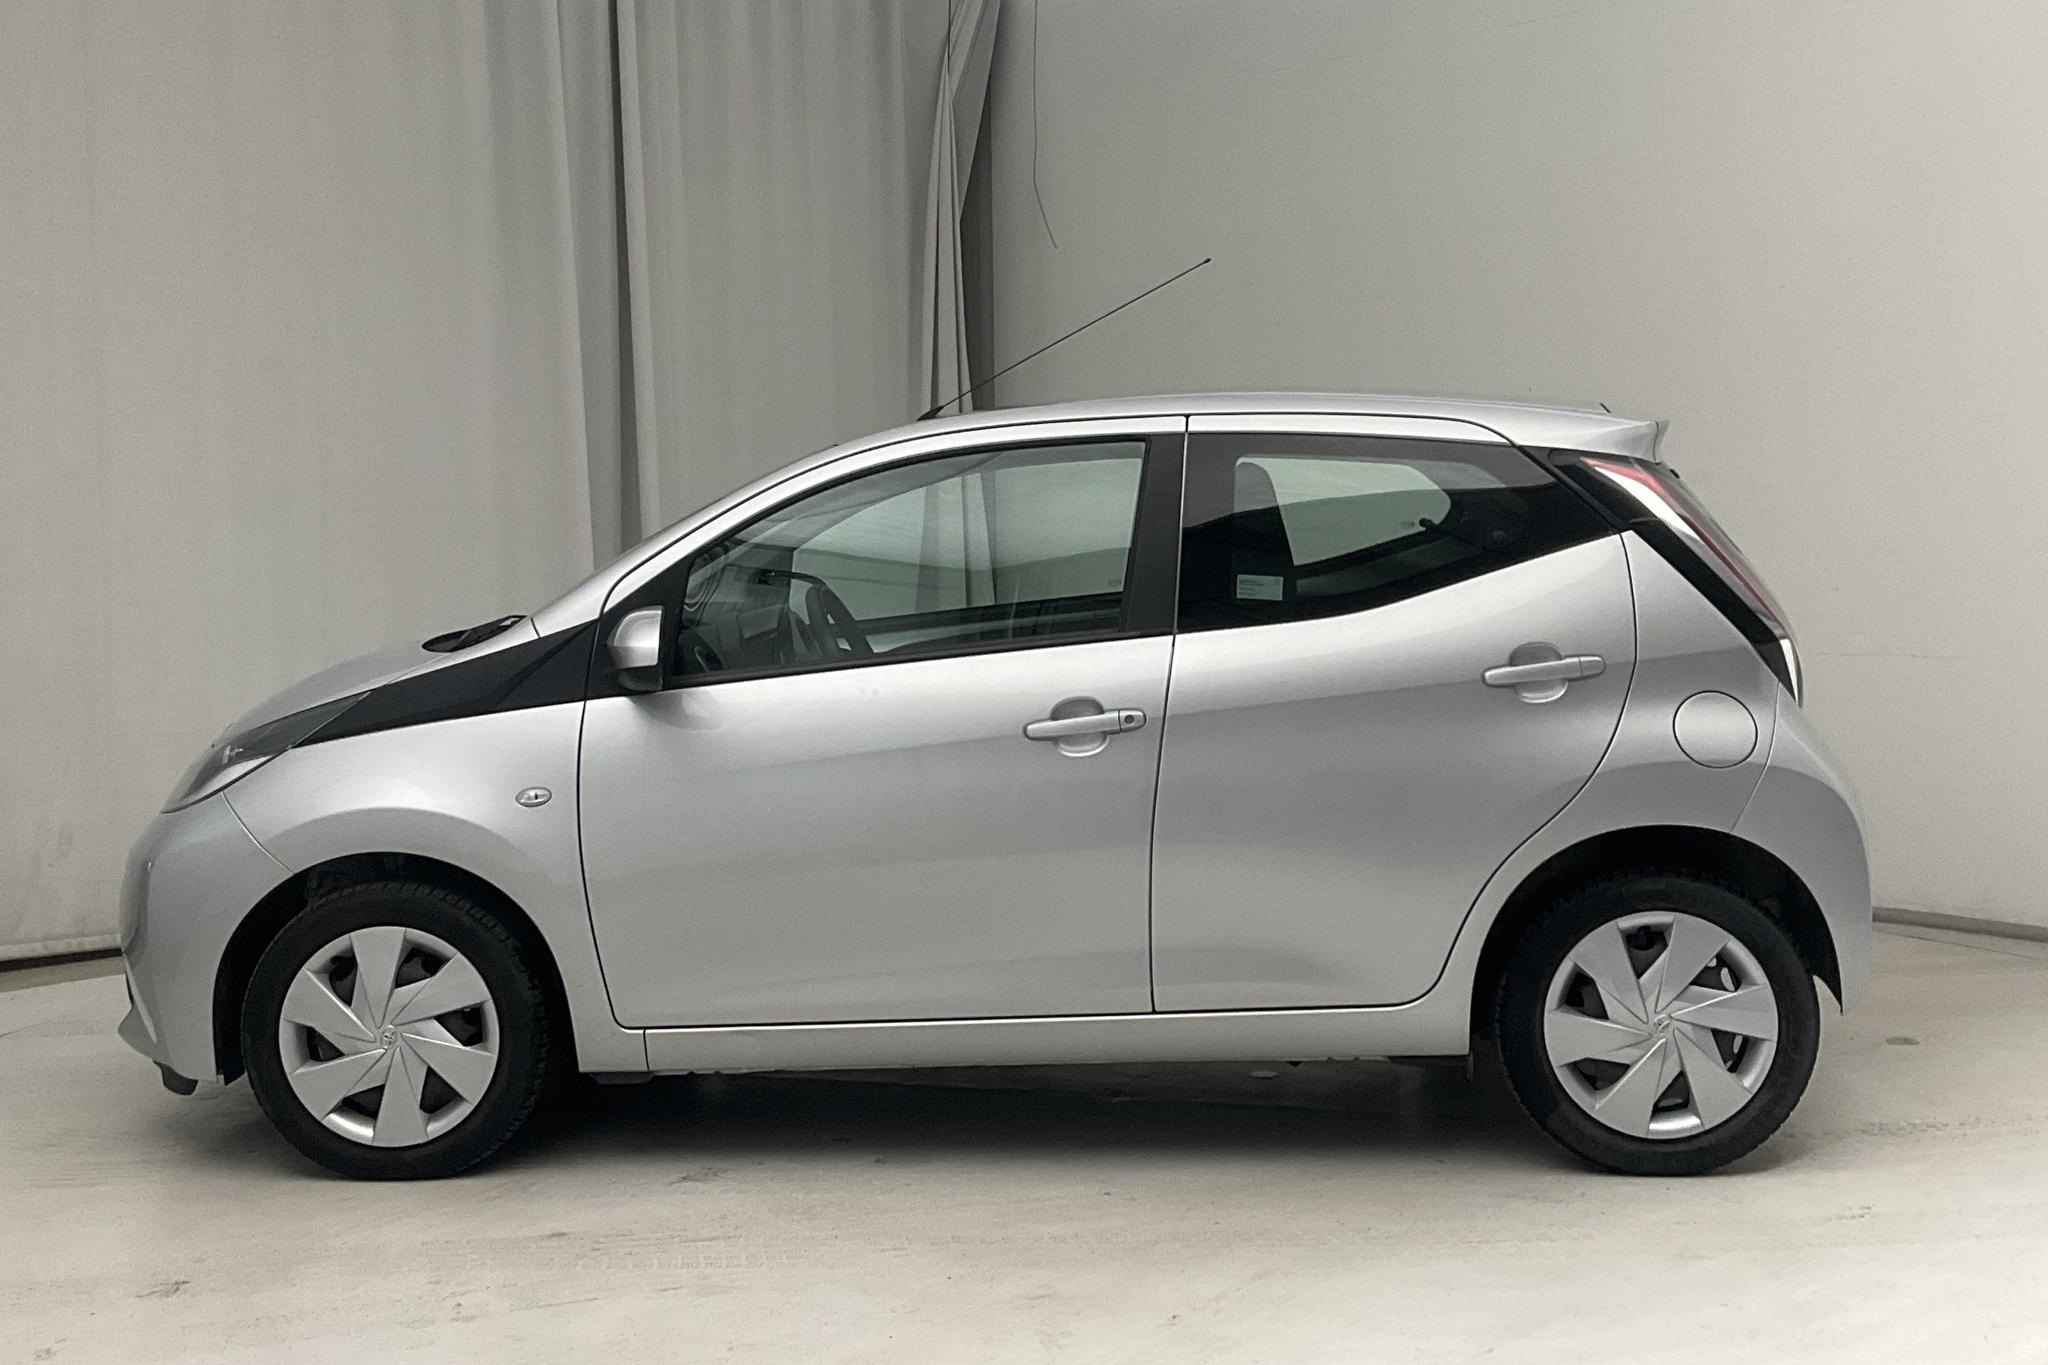 Toyota Aygo 1.0 5dr (69hk) - 1 635 mil - Automat - silver - 2015